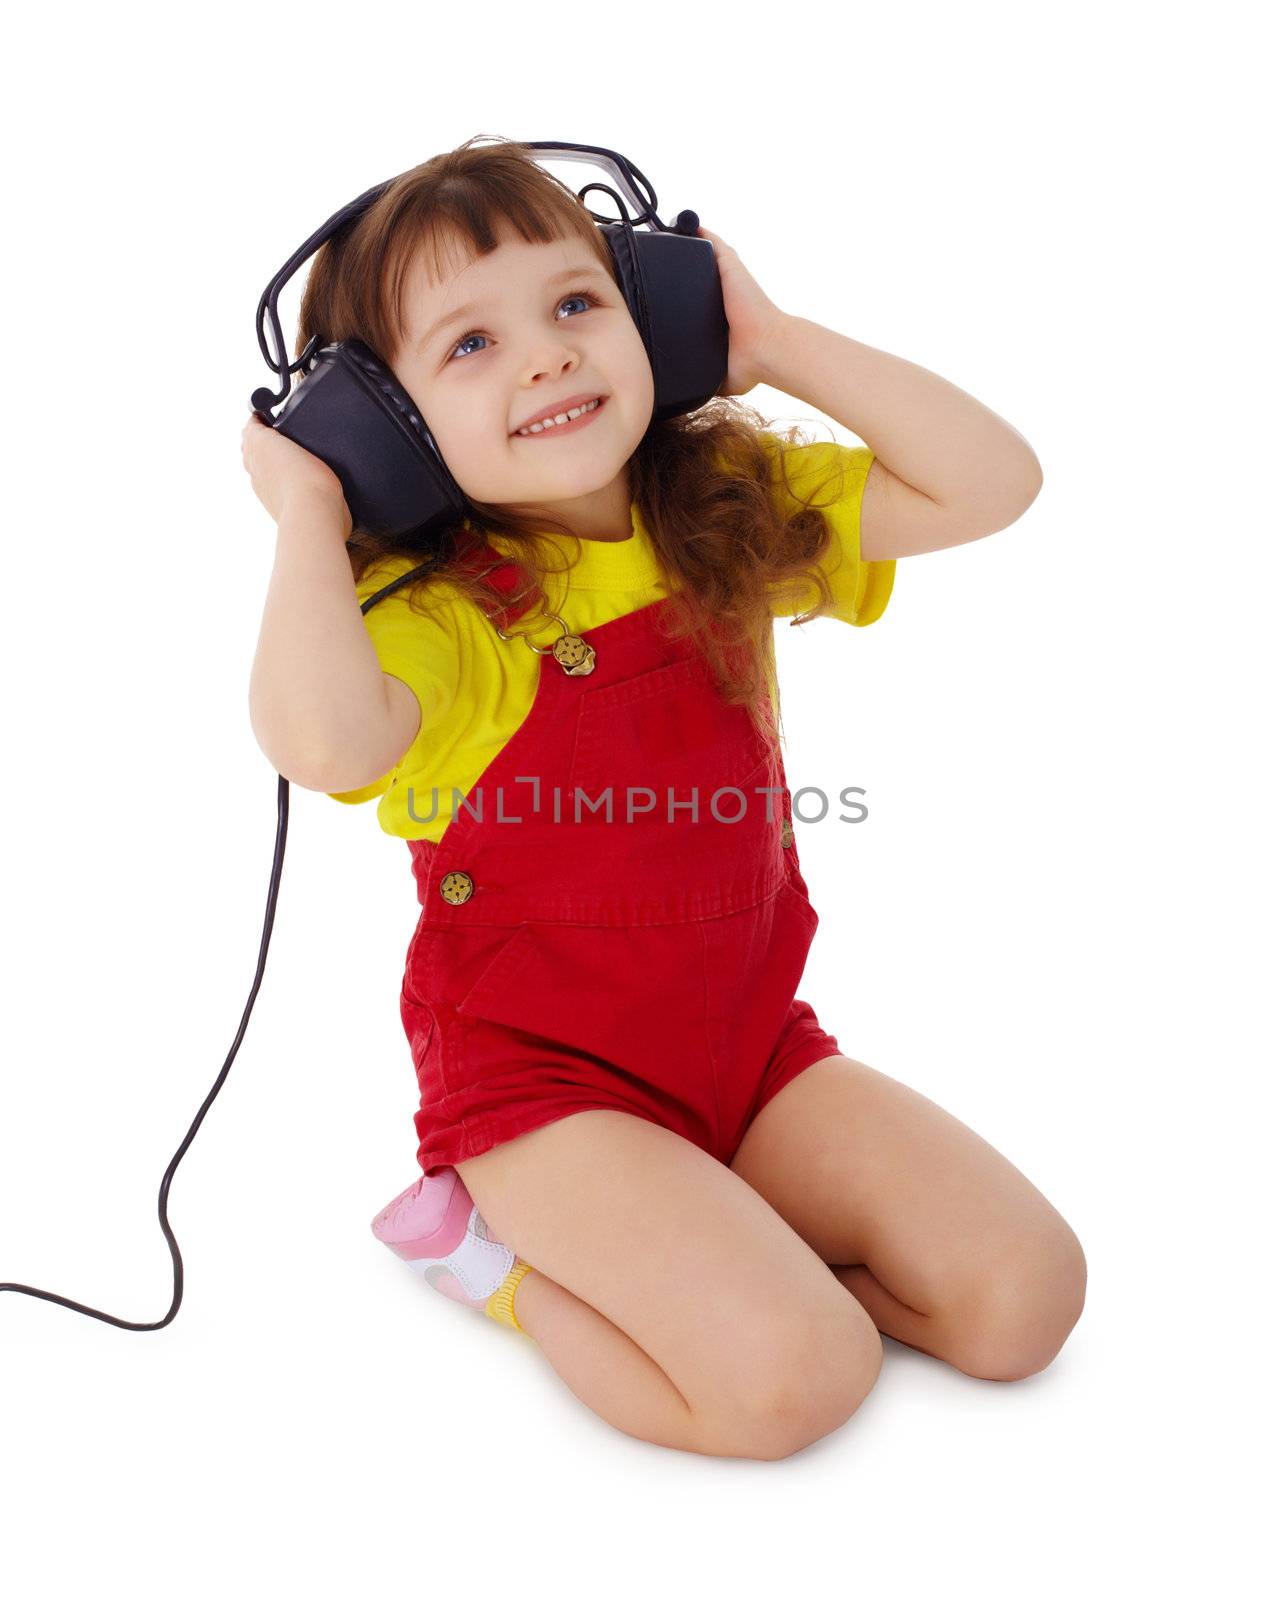 Little girl listens to music by pzaxe